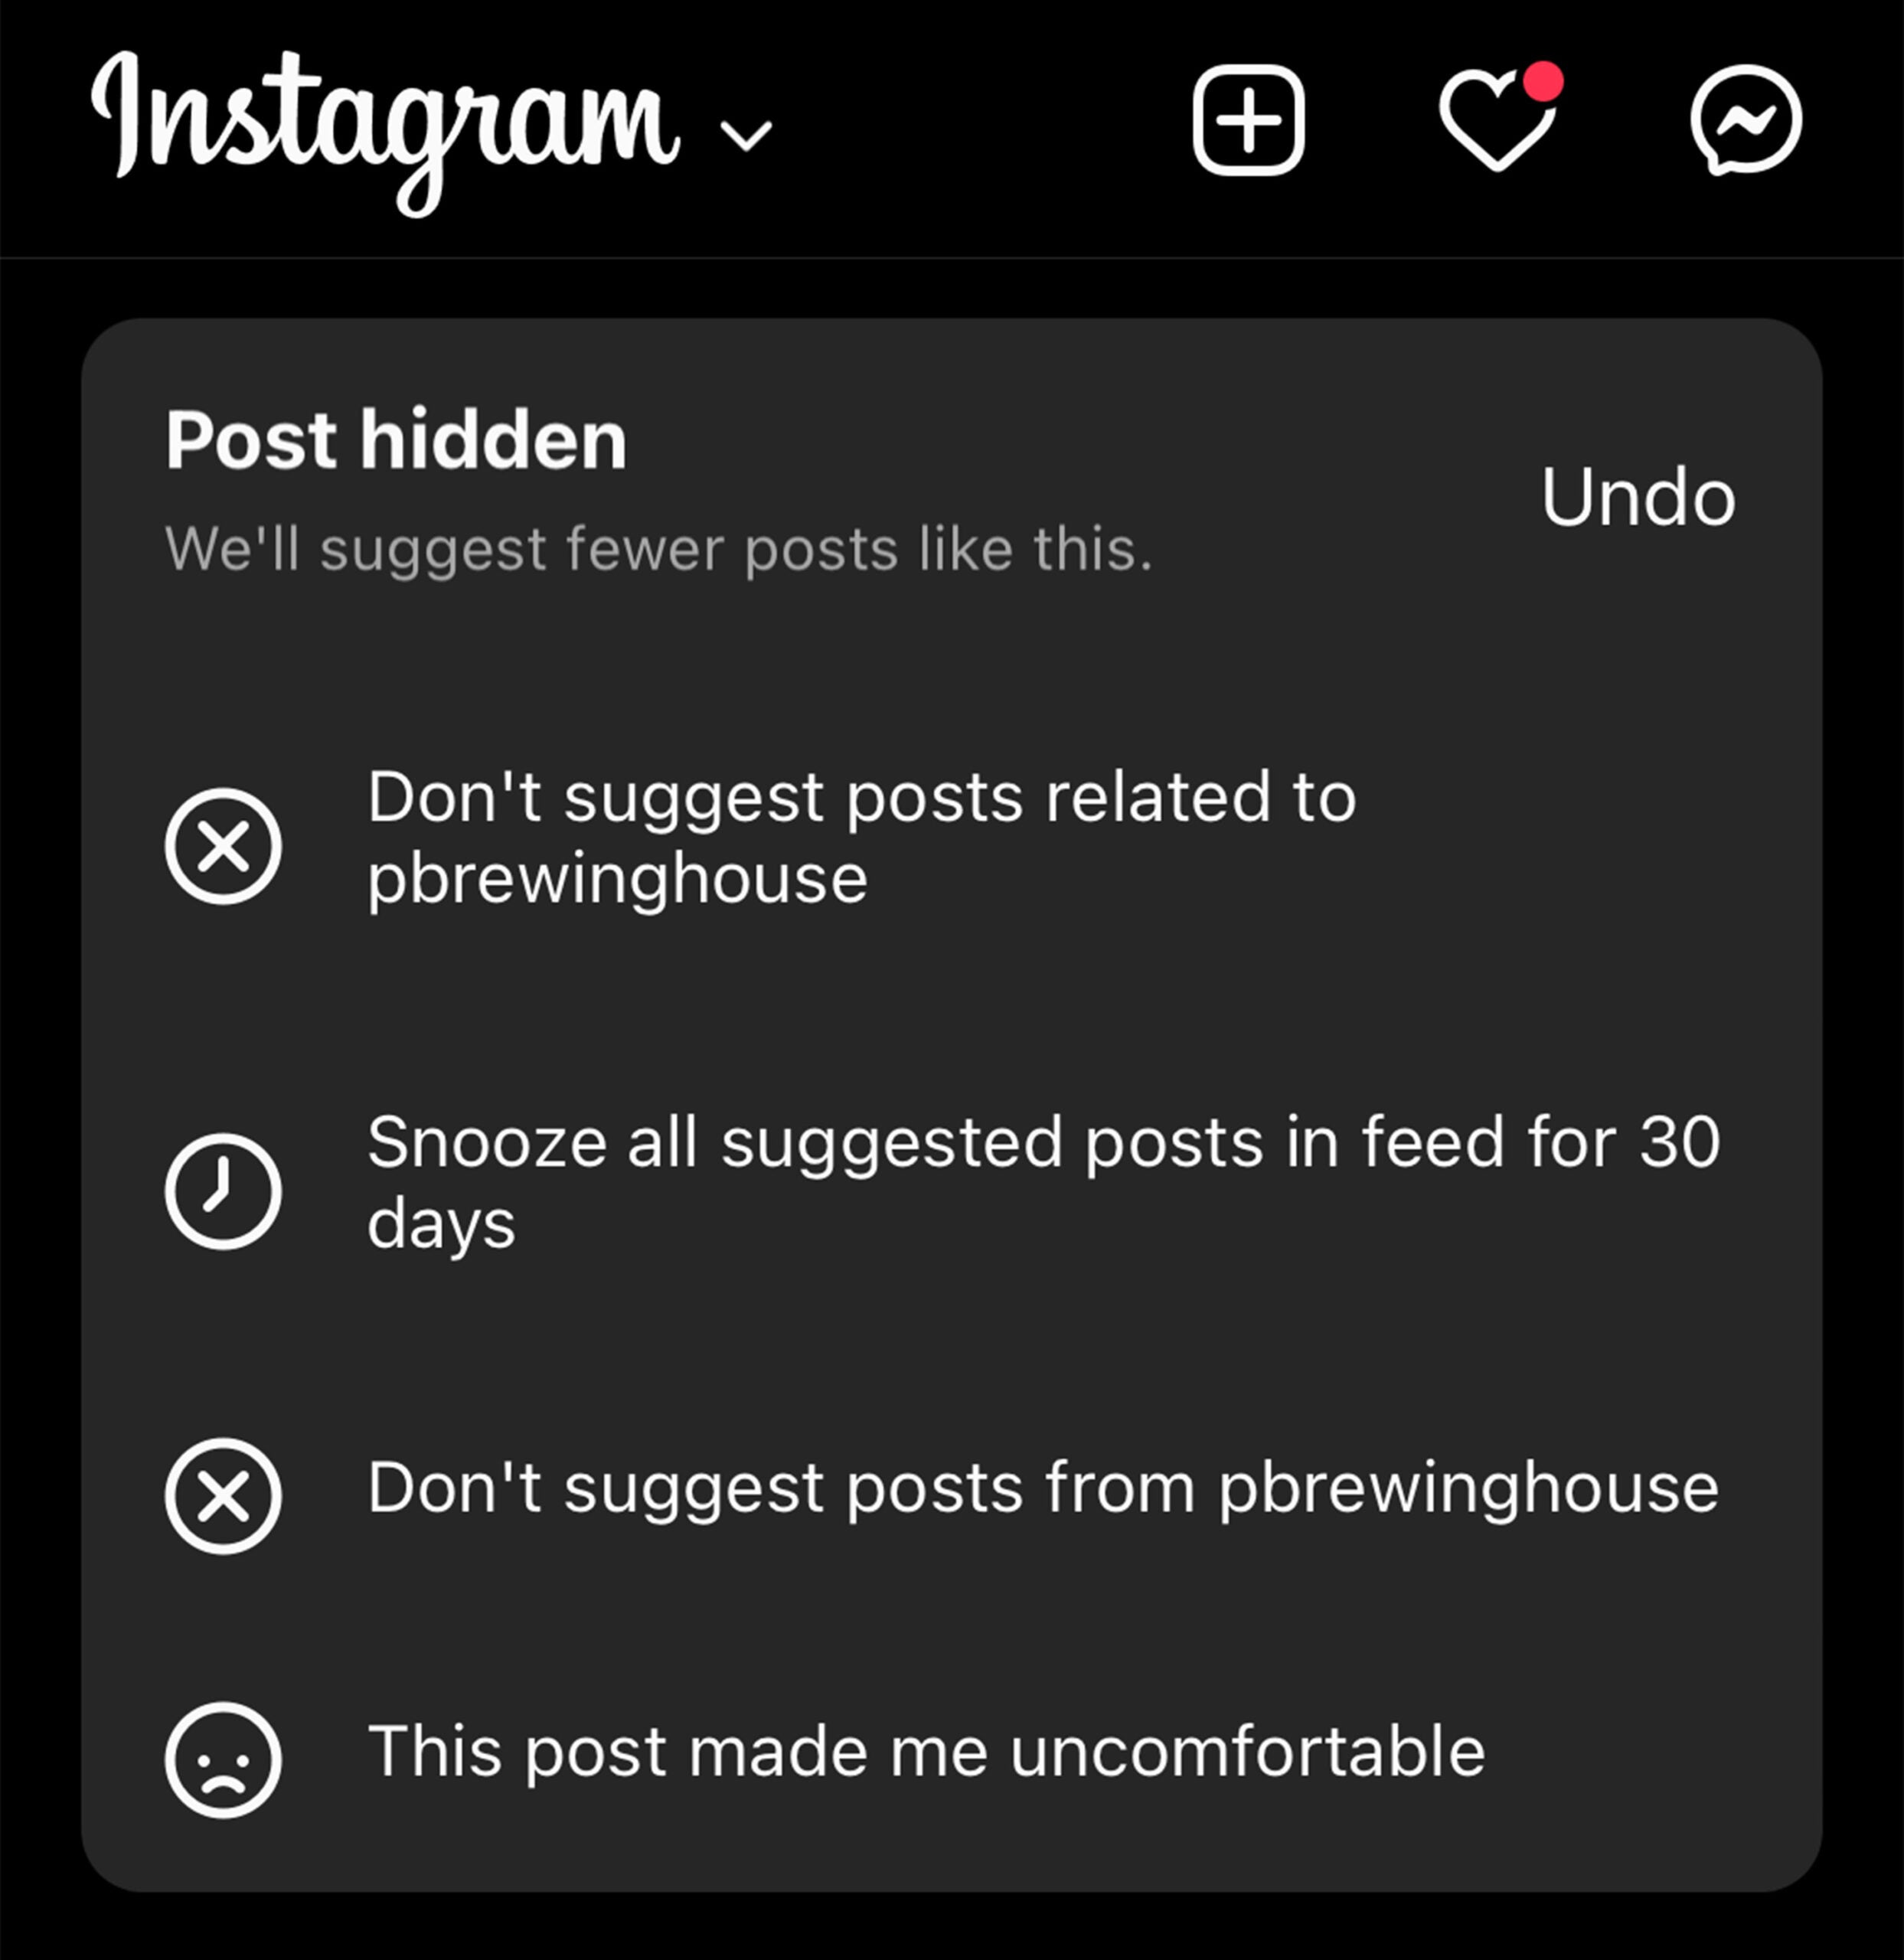 How to snooze suggested posts in Instagram